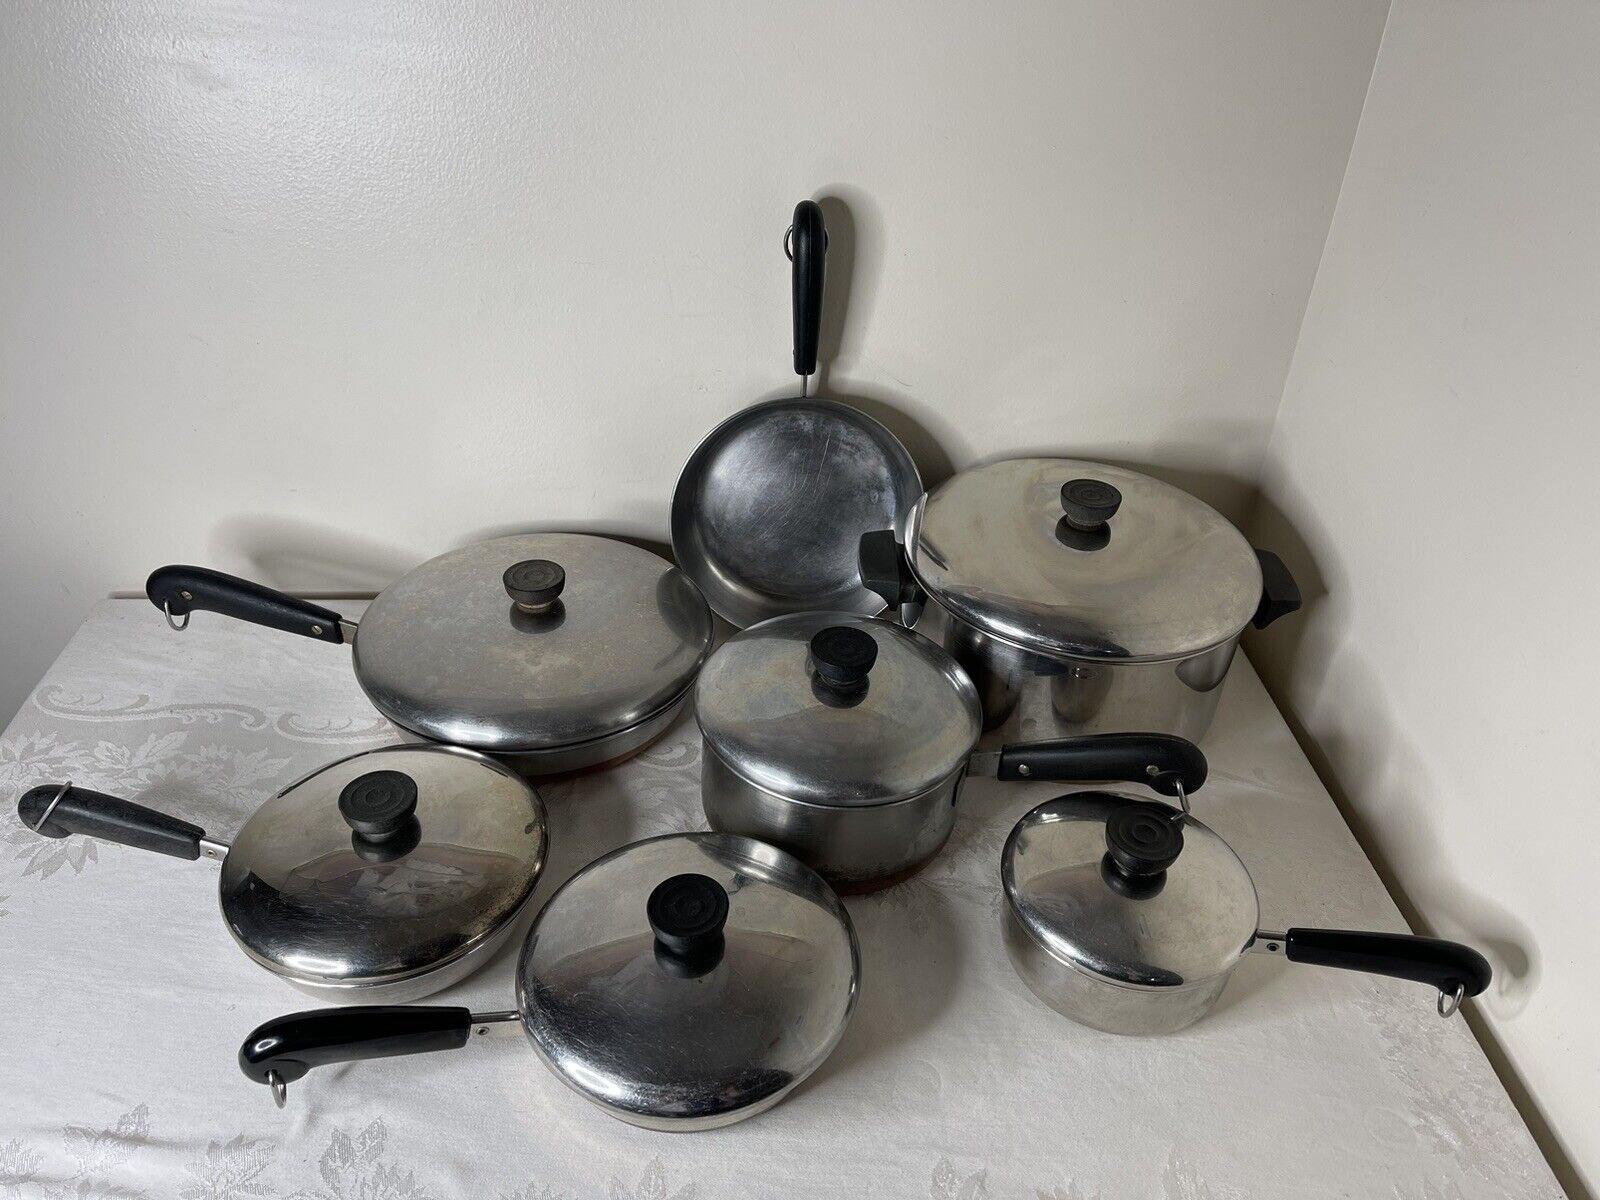 Huge 13 Pc Lot Of Vintage 1801 Revere Ware Stainless Steel Pots & Pans With Lids